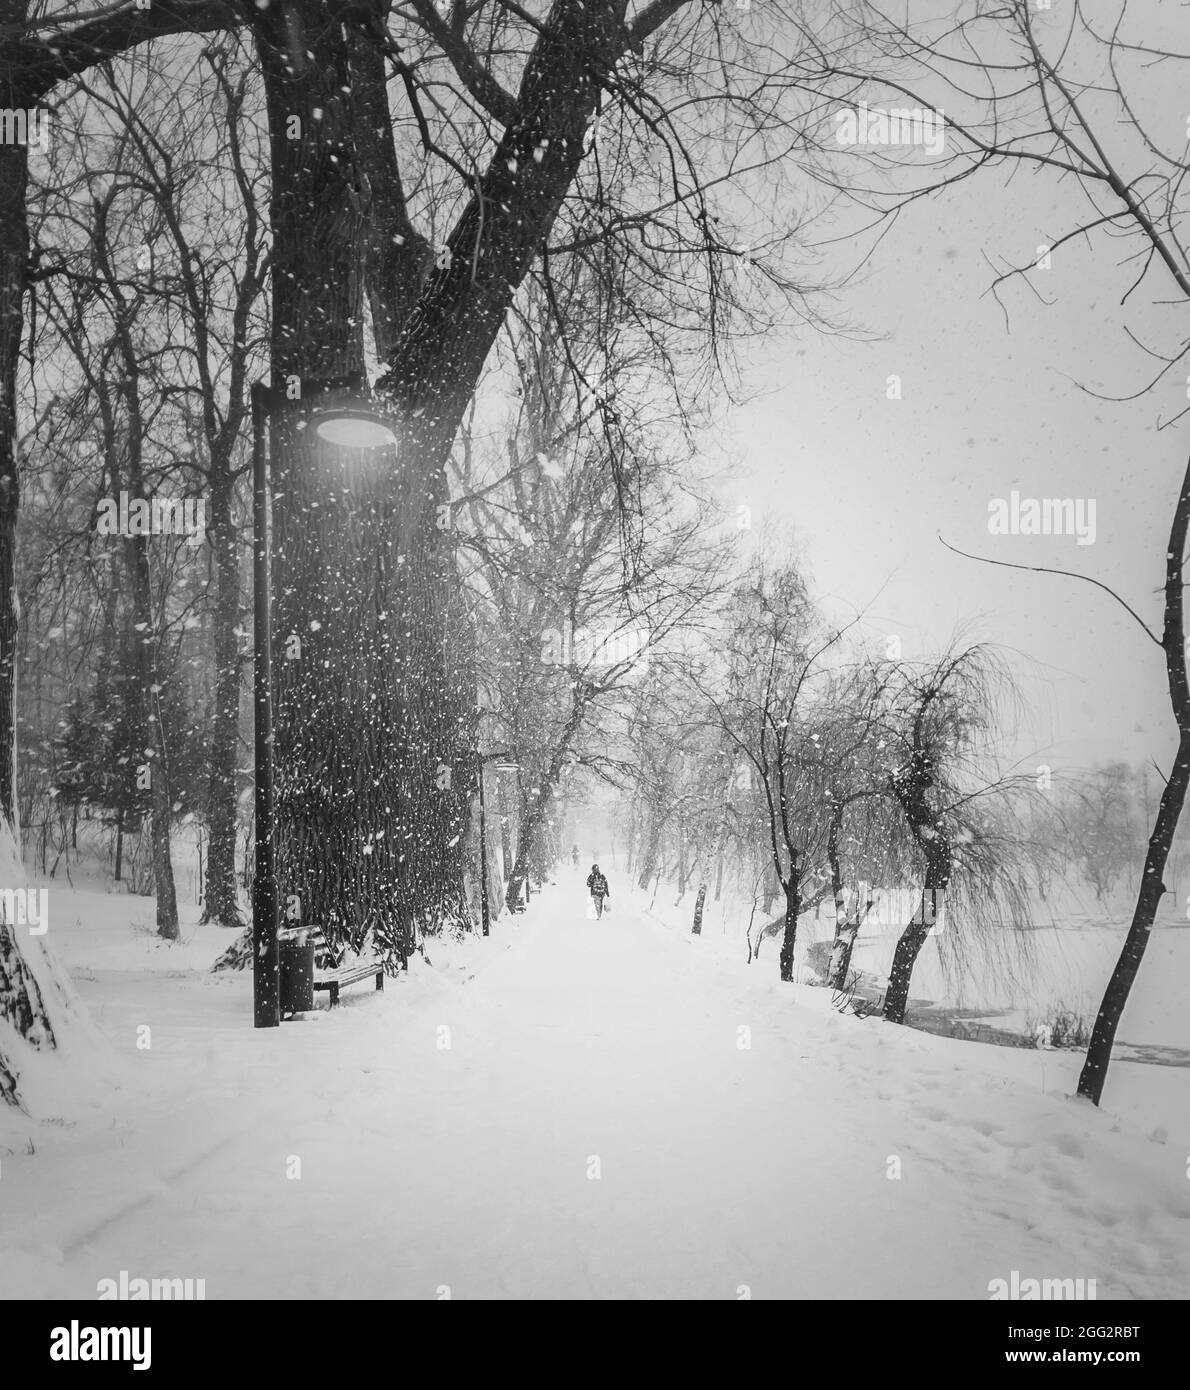 Black and white winter scene with a lone person walking in a blizzard along trees alley in the snowy park. Wanderer silhouette on a pathway in a silen Stock Photo